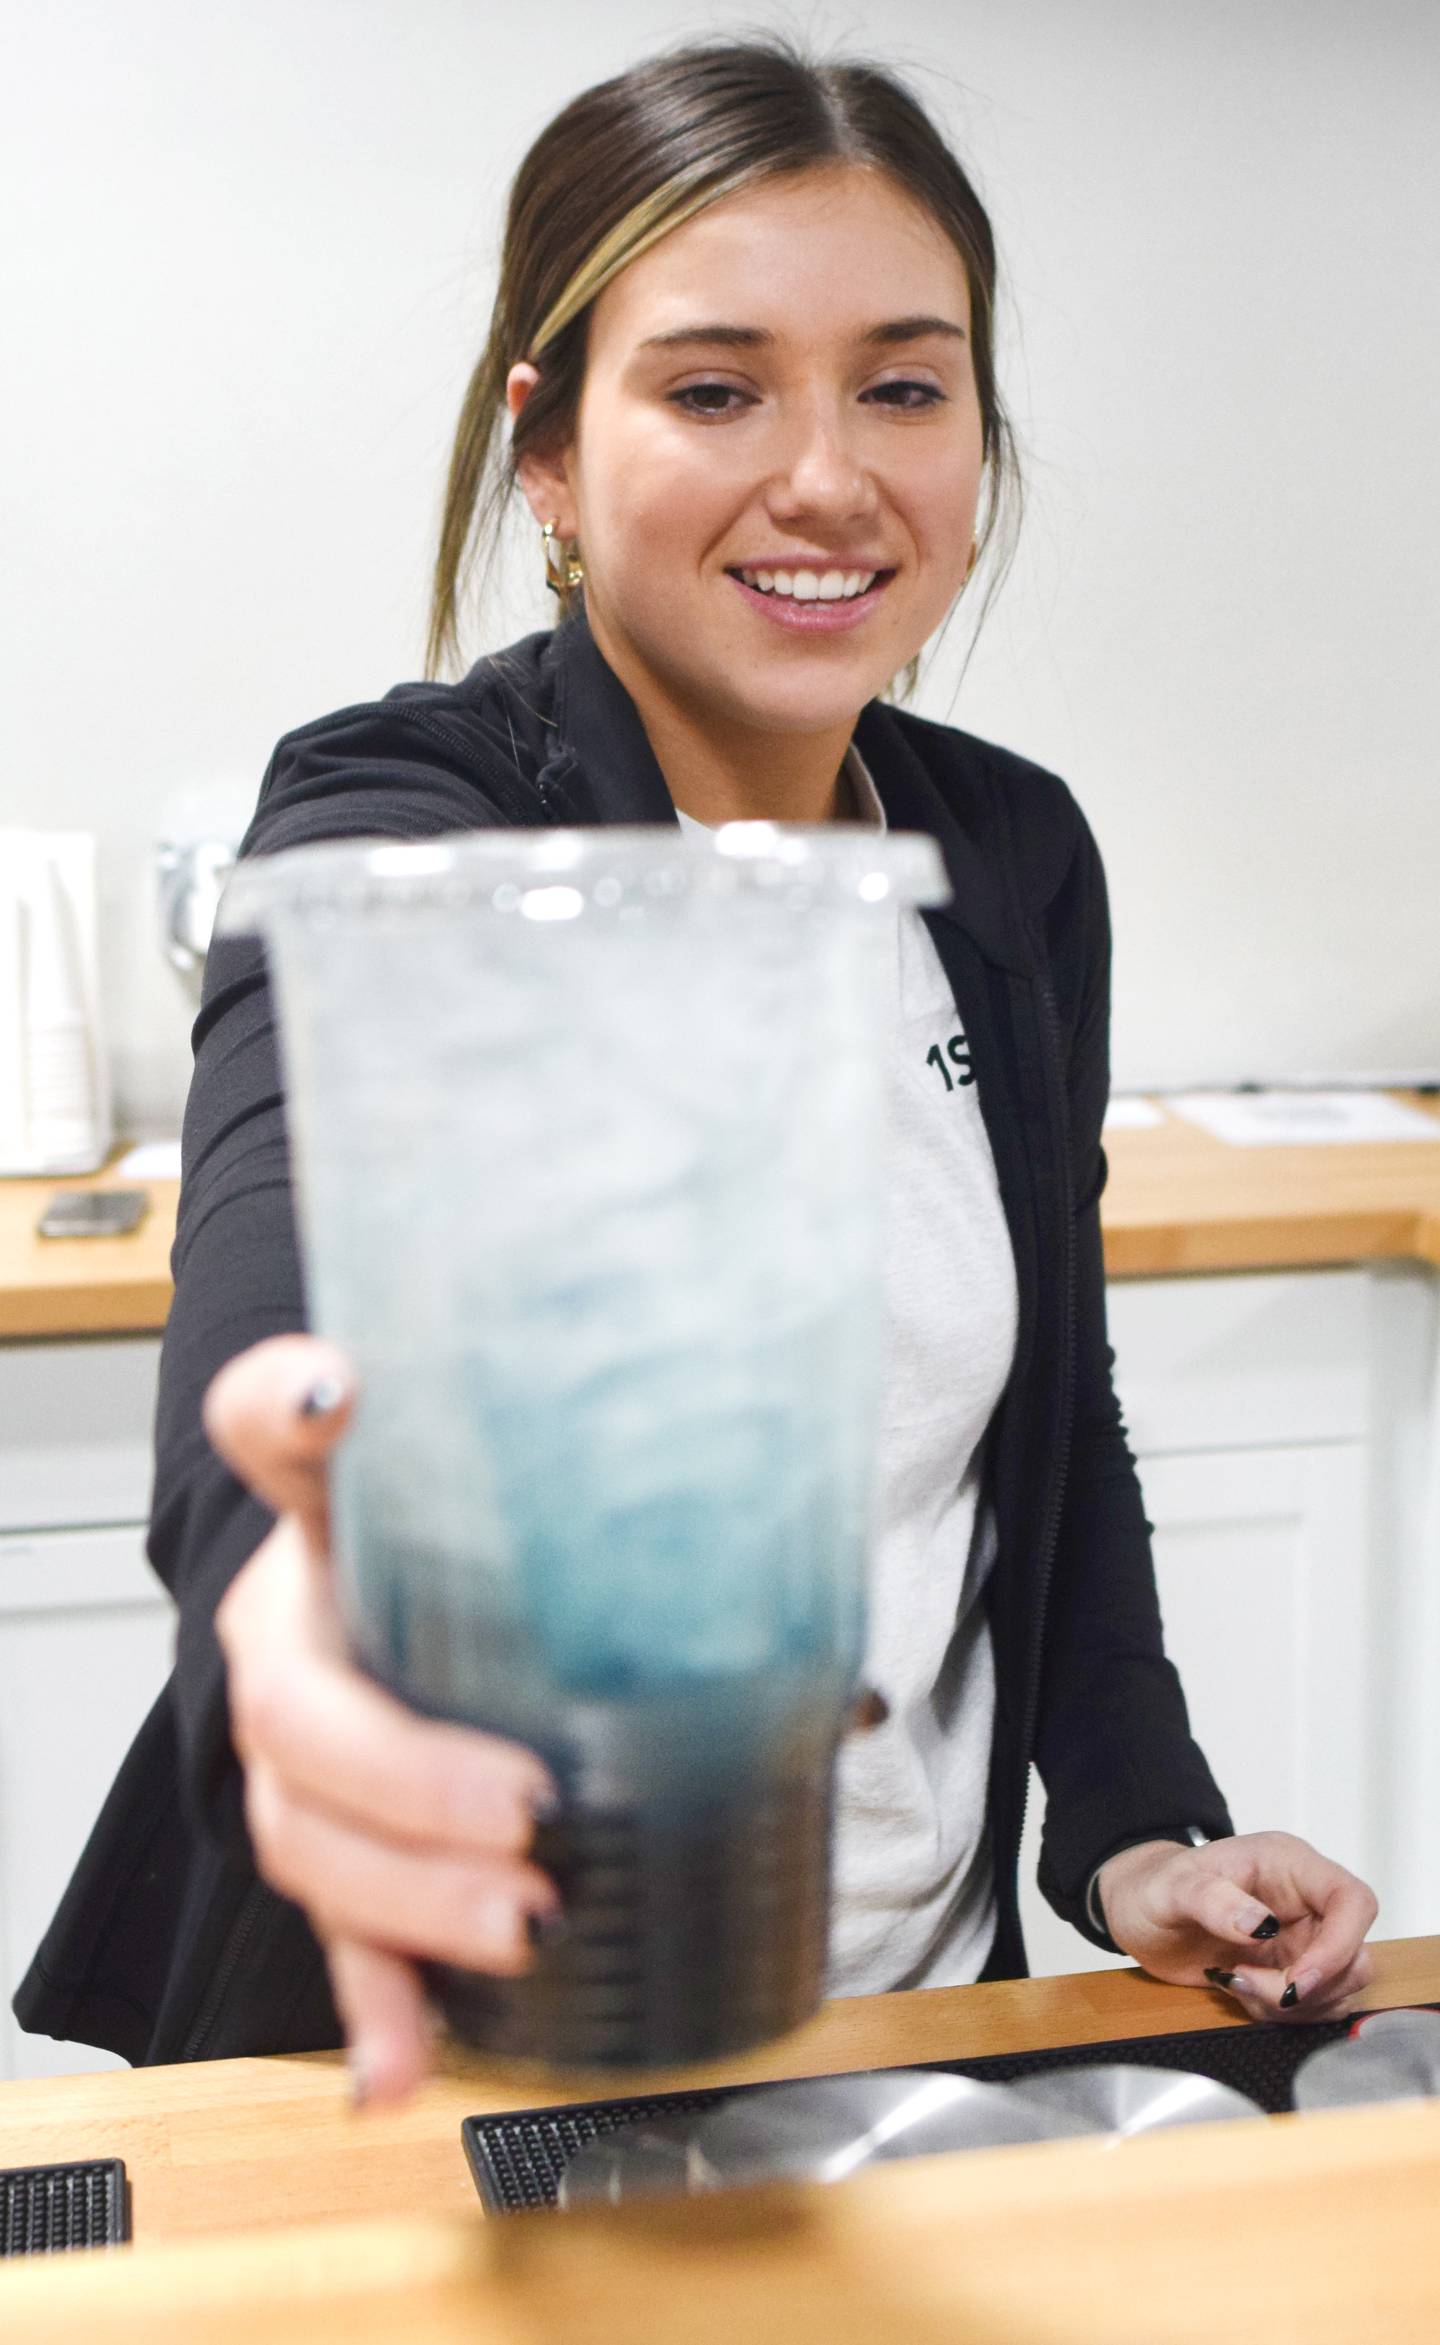 Darian Morrison, of Newton, serves a energized tea at 1st Ave Nutrition. At 19 years old, Morrison is considered to be the youngest brick-and-mortar business owner in Newton.